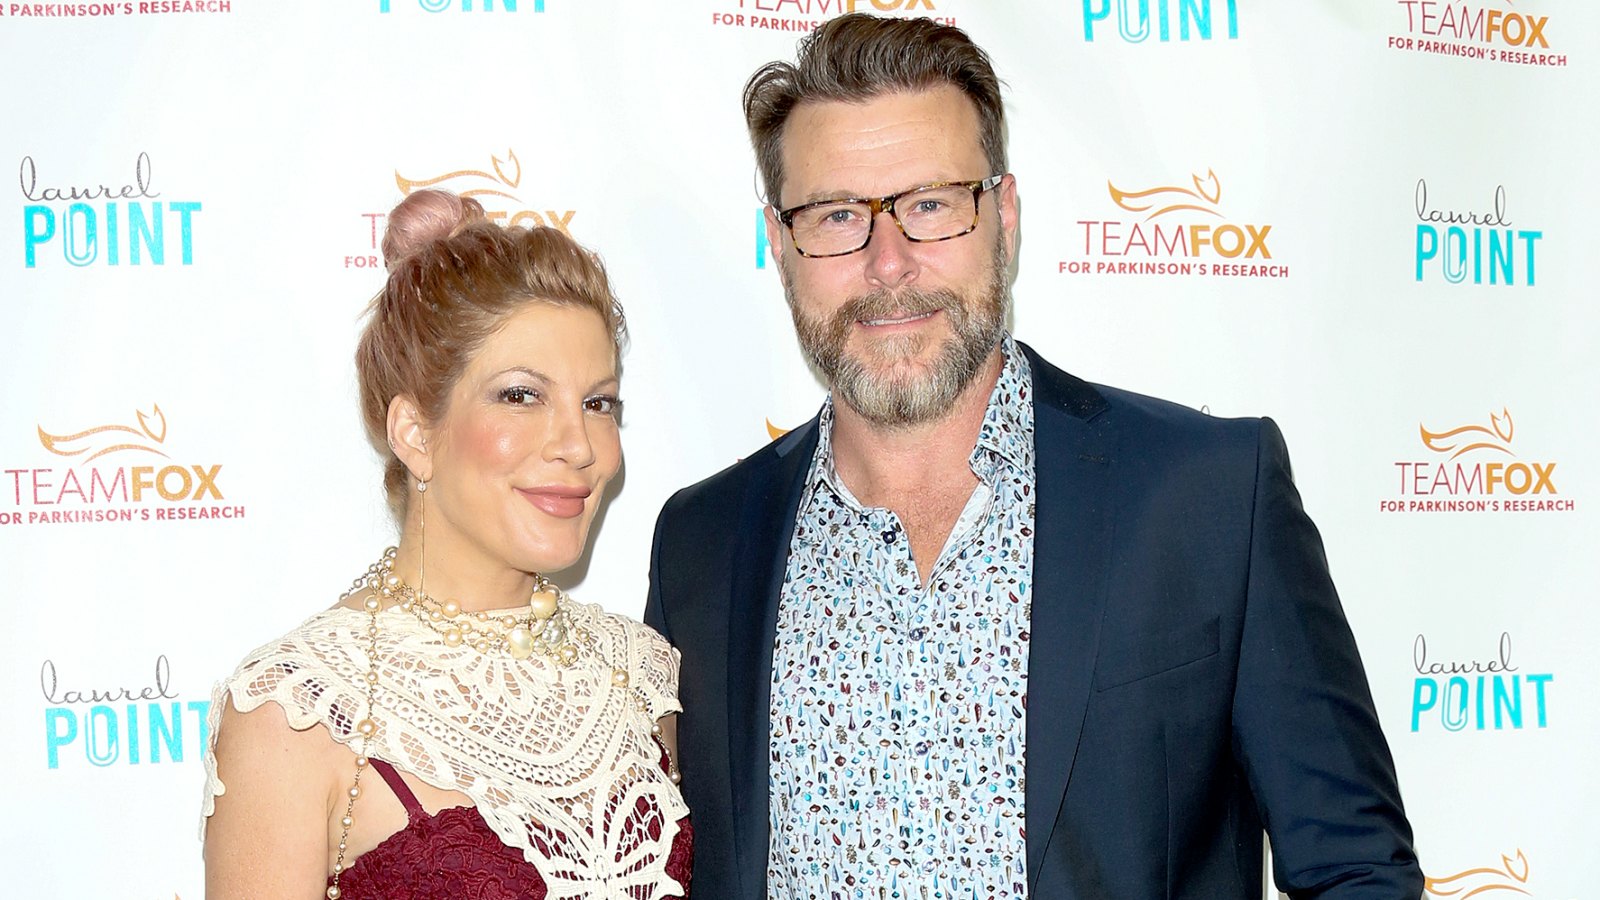 Tori Spelling and Dean McDermott attend the "Raising The Bar To End Parkinson's" at Laurel Point on July 27, 2016 in Studio City, California.